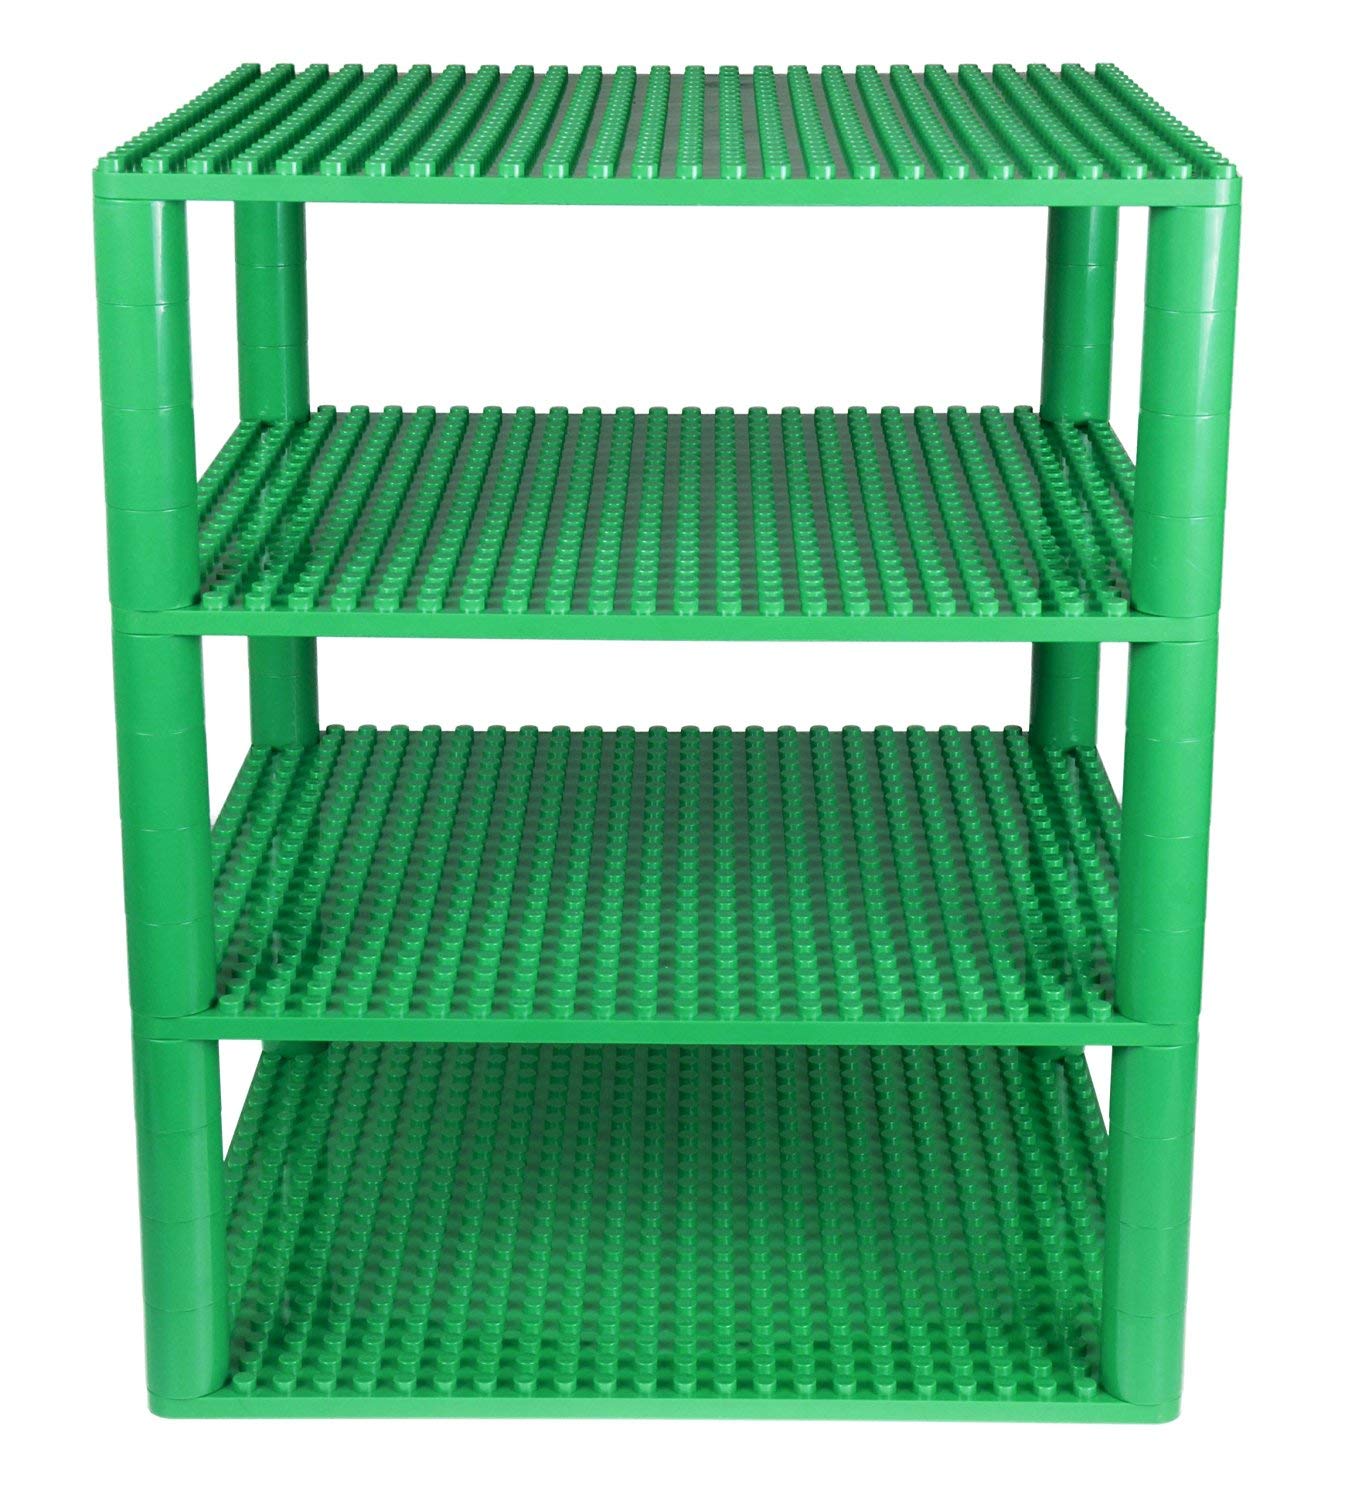 Strictly Briks Classic Big Briks Stackable Baseplates, Large Pegs for Ages 3 and Up, 100% Compatible with All Major Brands, Green, 1 Piece, 13.75